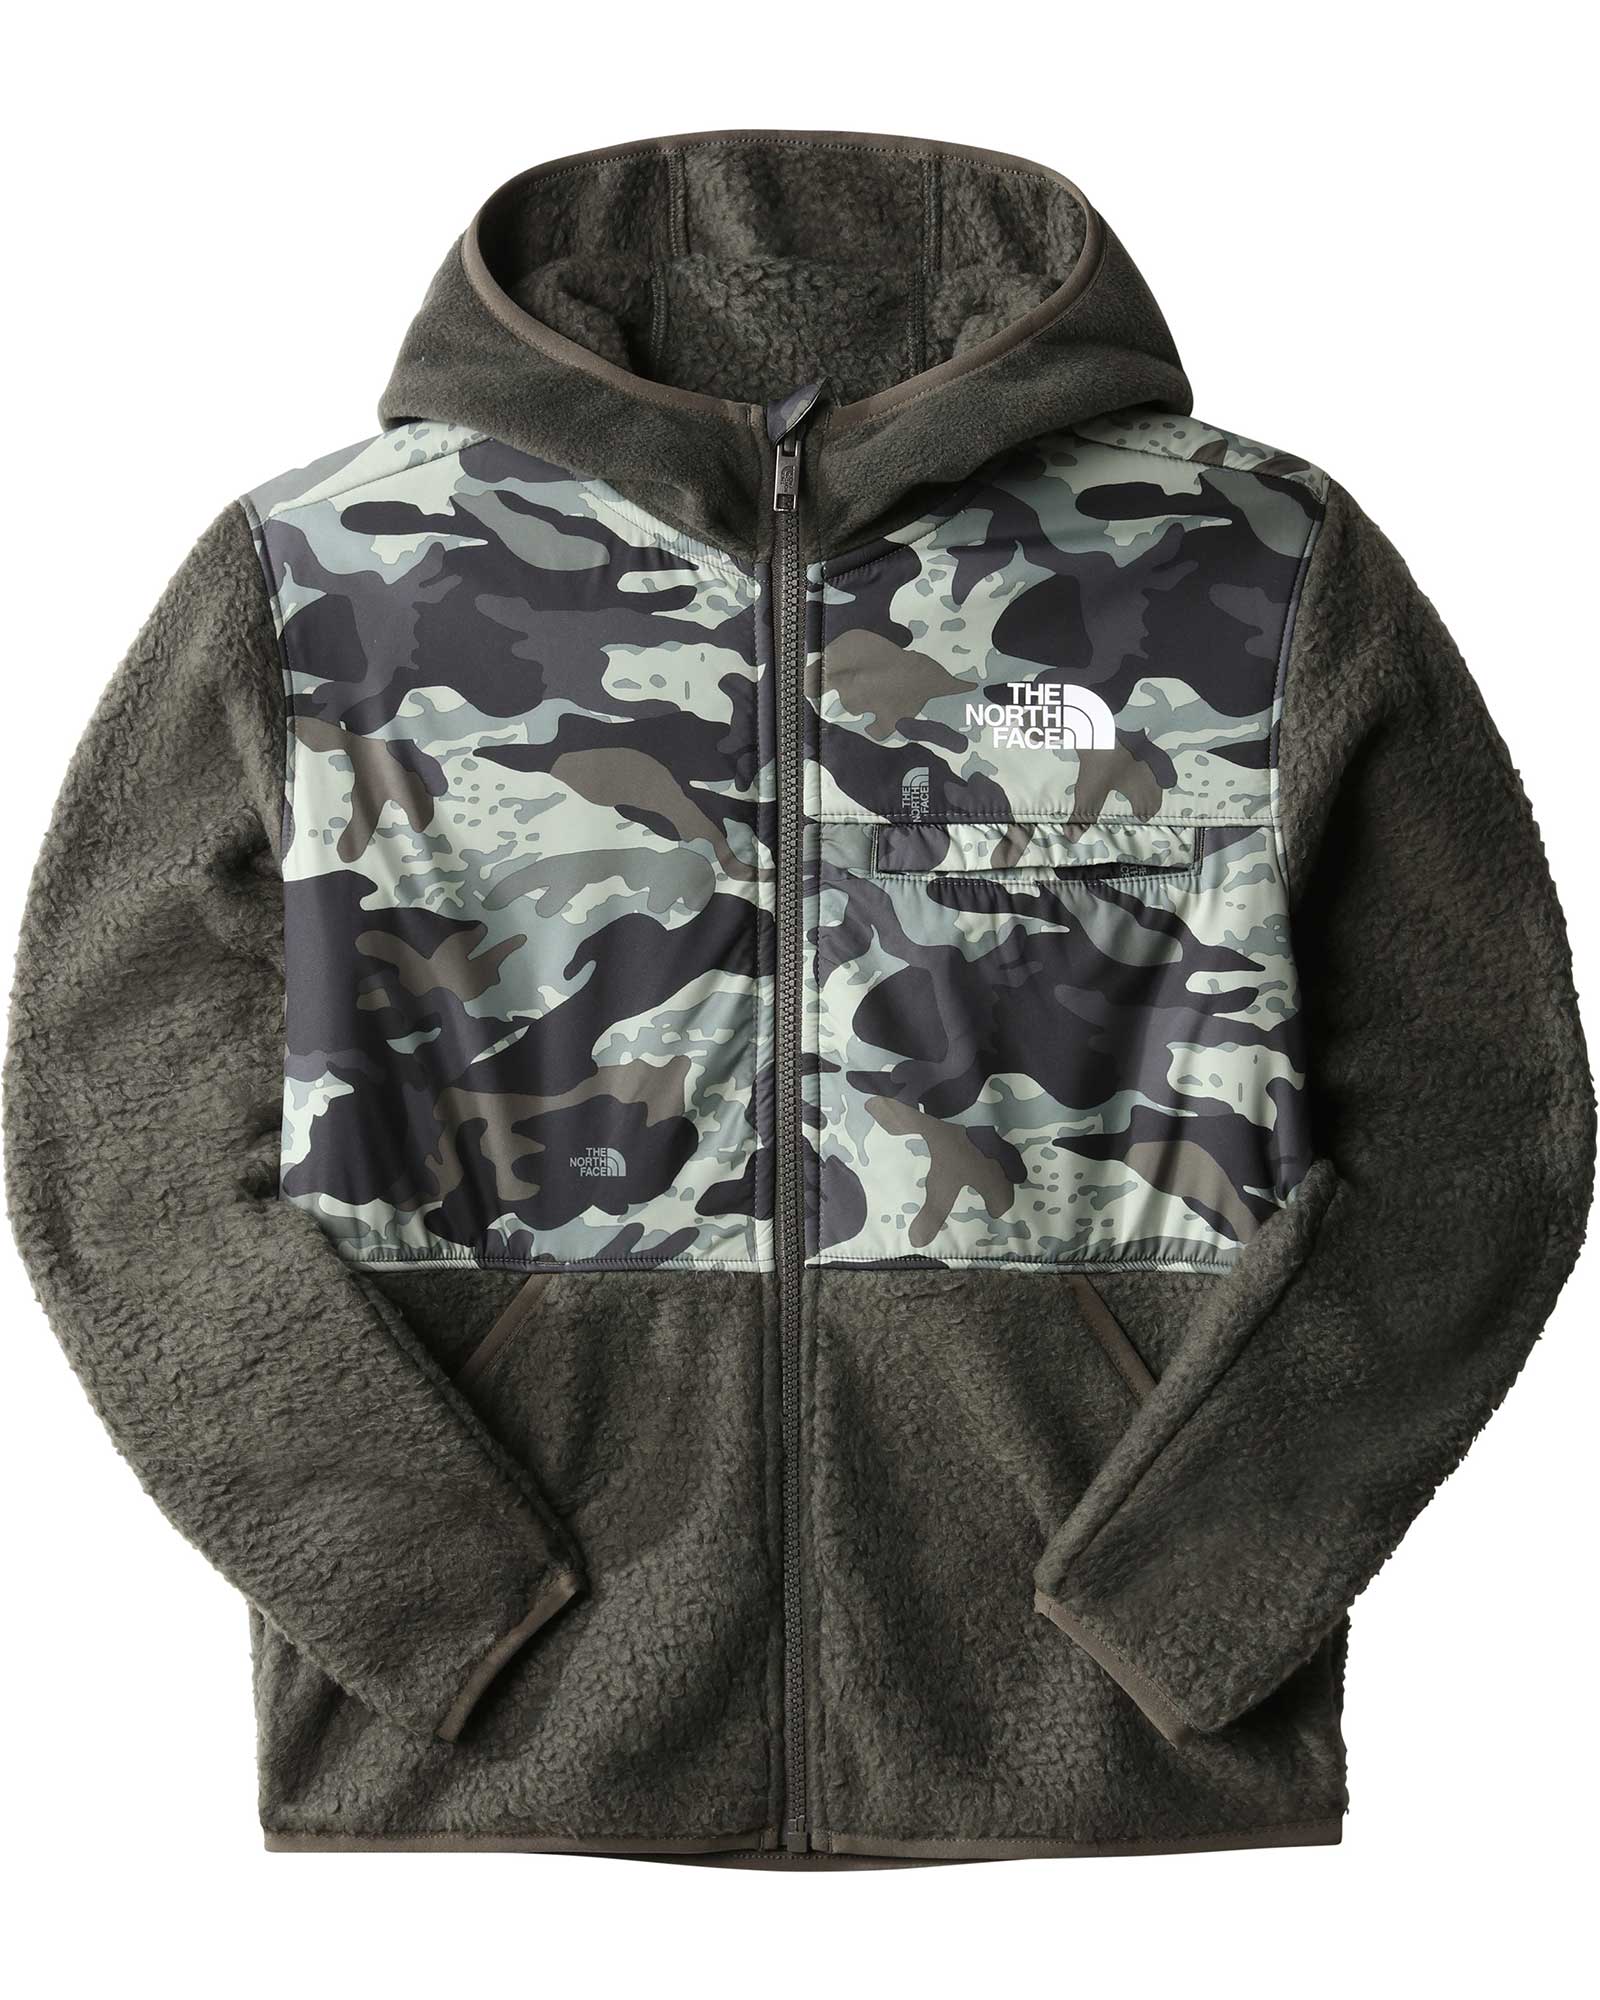 The North Face Forrest Kids’ Fleece Full Zip Hooded Jacket - New Taupe Green Camo L